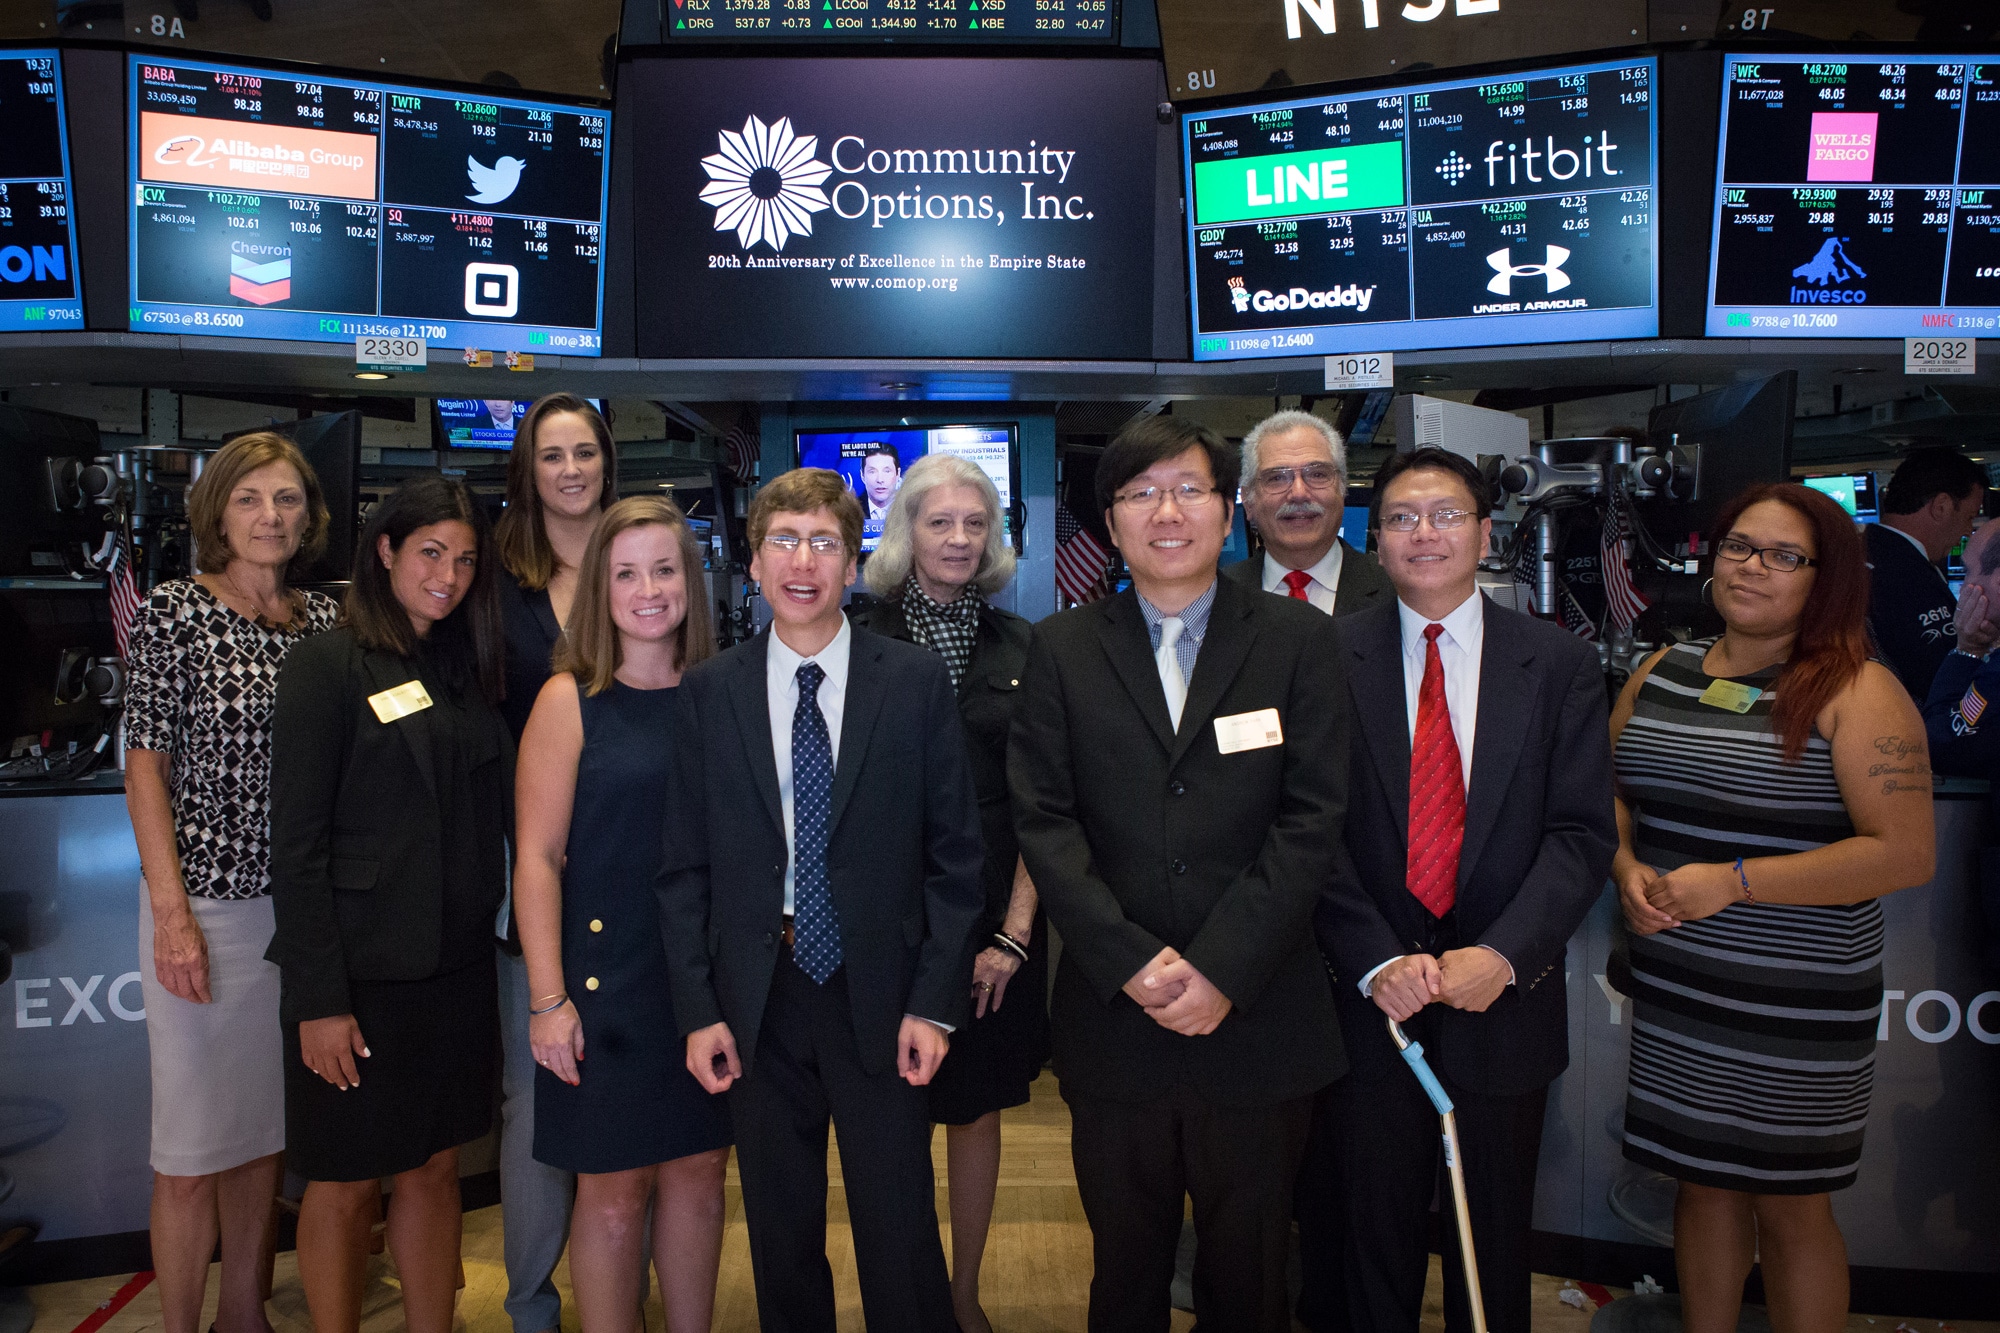 On August 15, 2016, Community Options, rang the Closing Bell at the New York Stock Exchange.